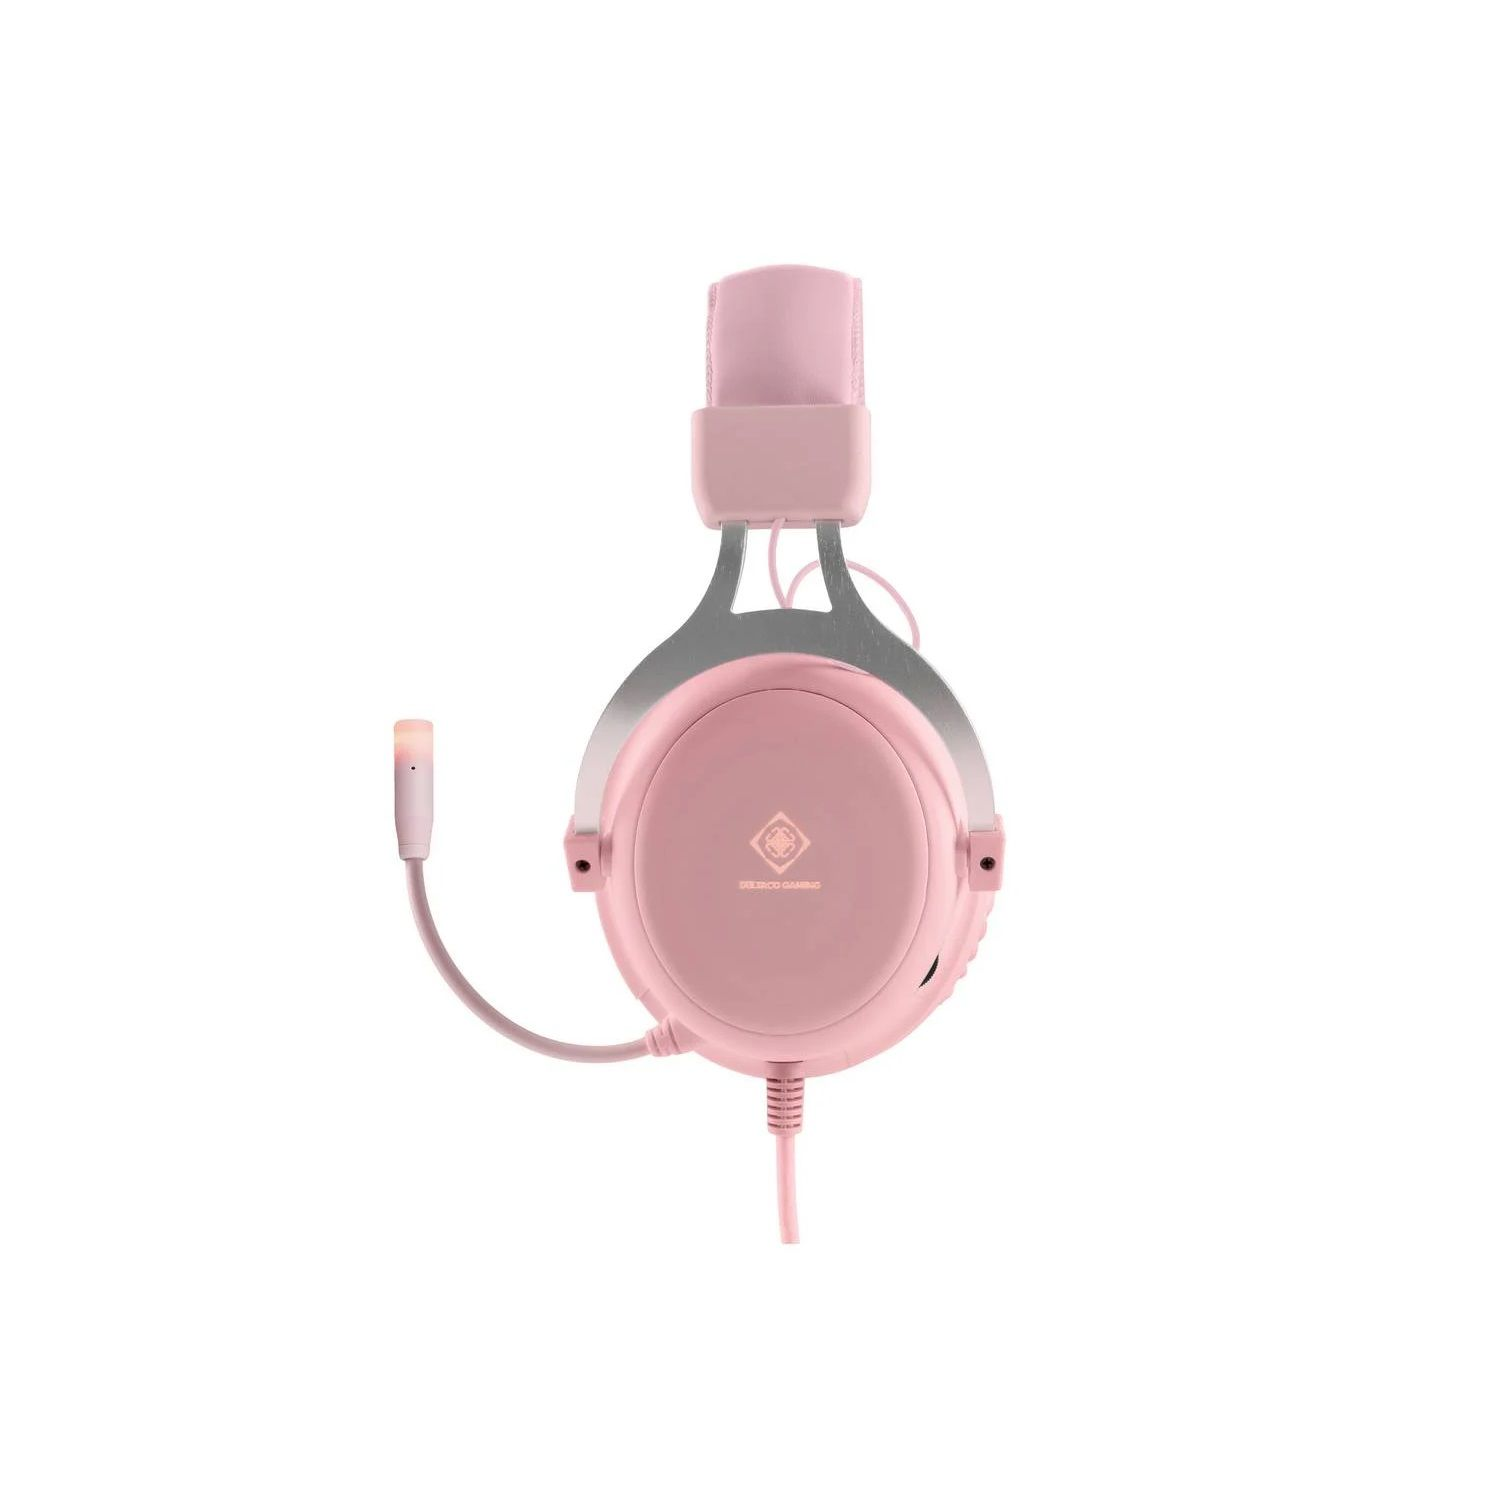 DELTACO GAMING Headset mit Headset Gamer Over-ear pink LED-Beleuchtung